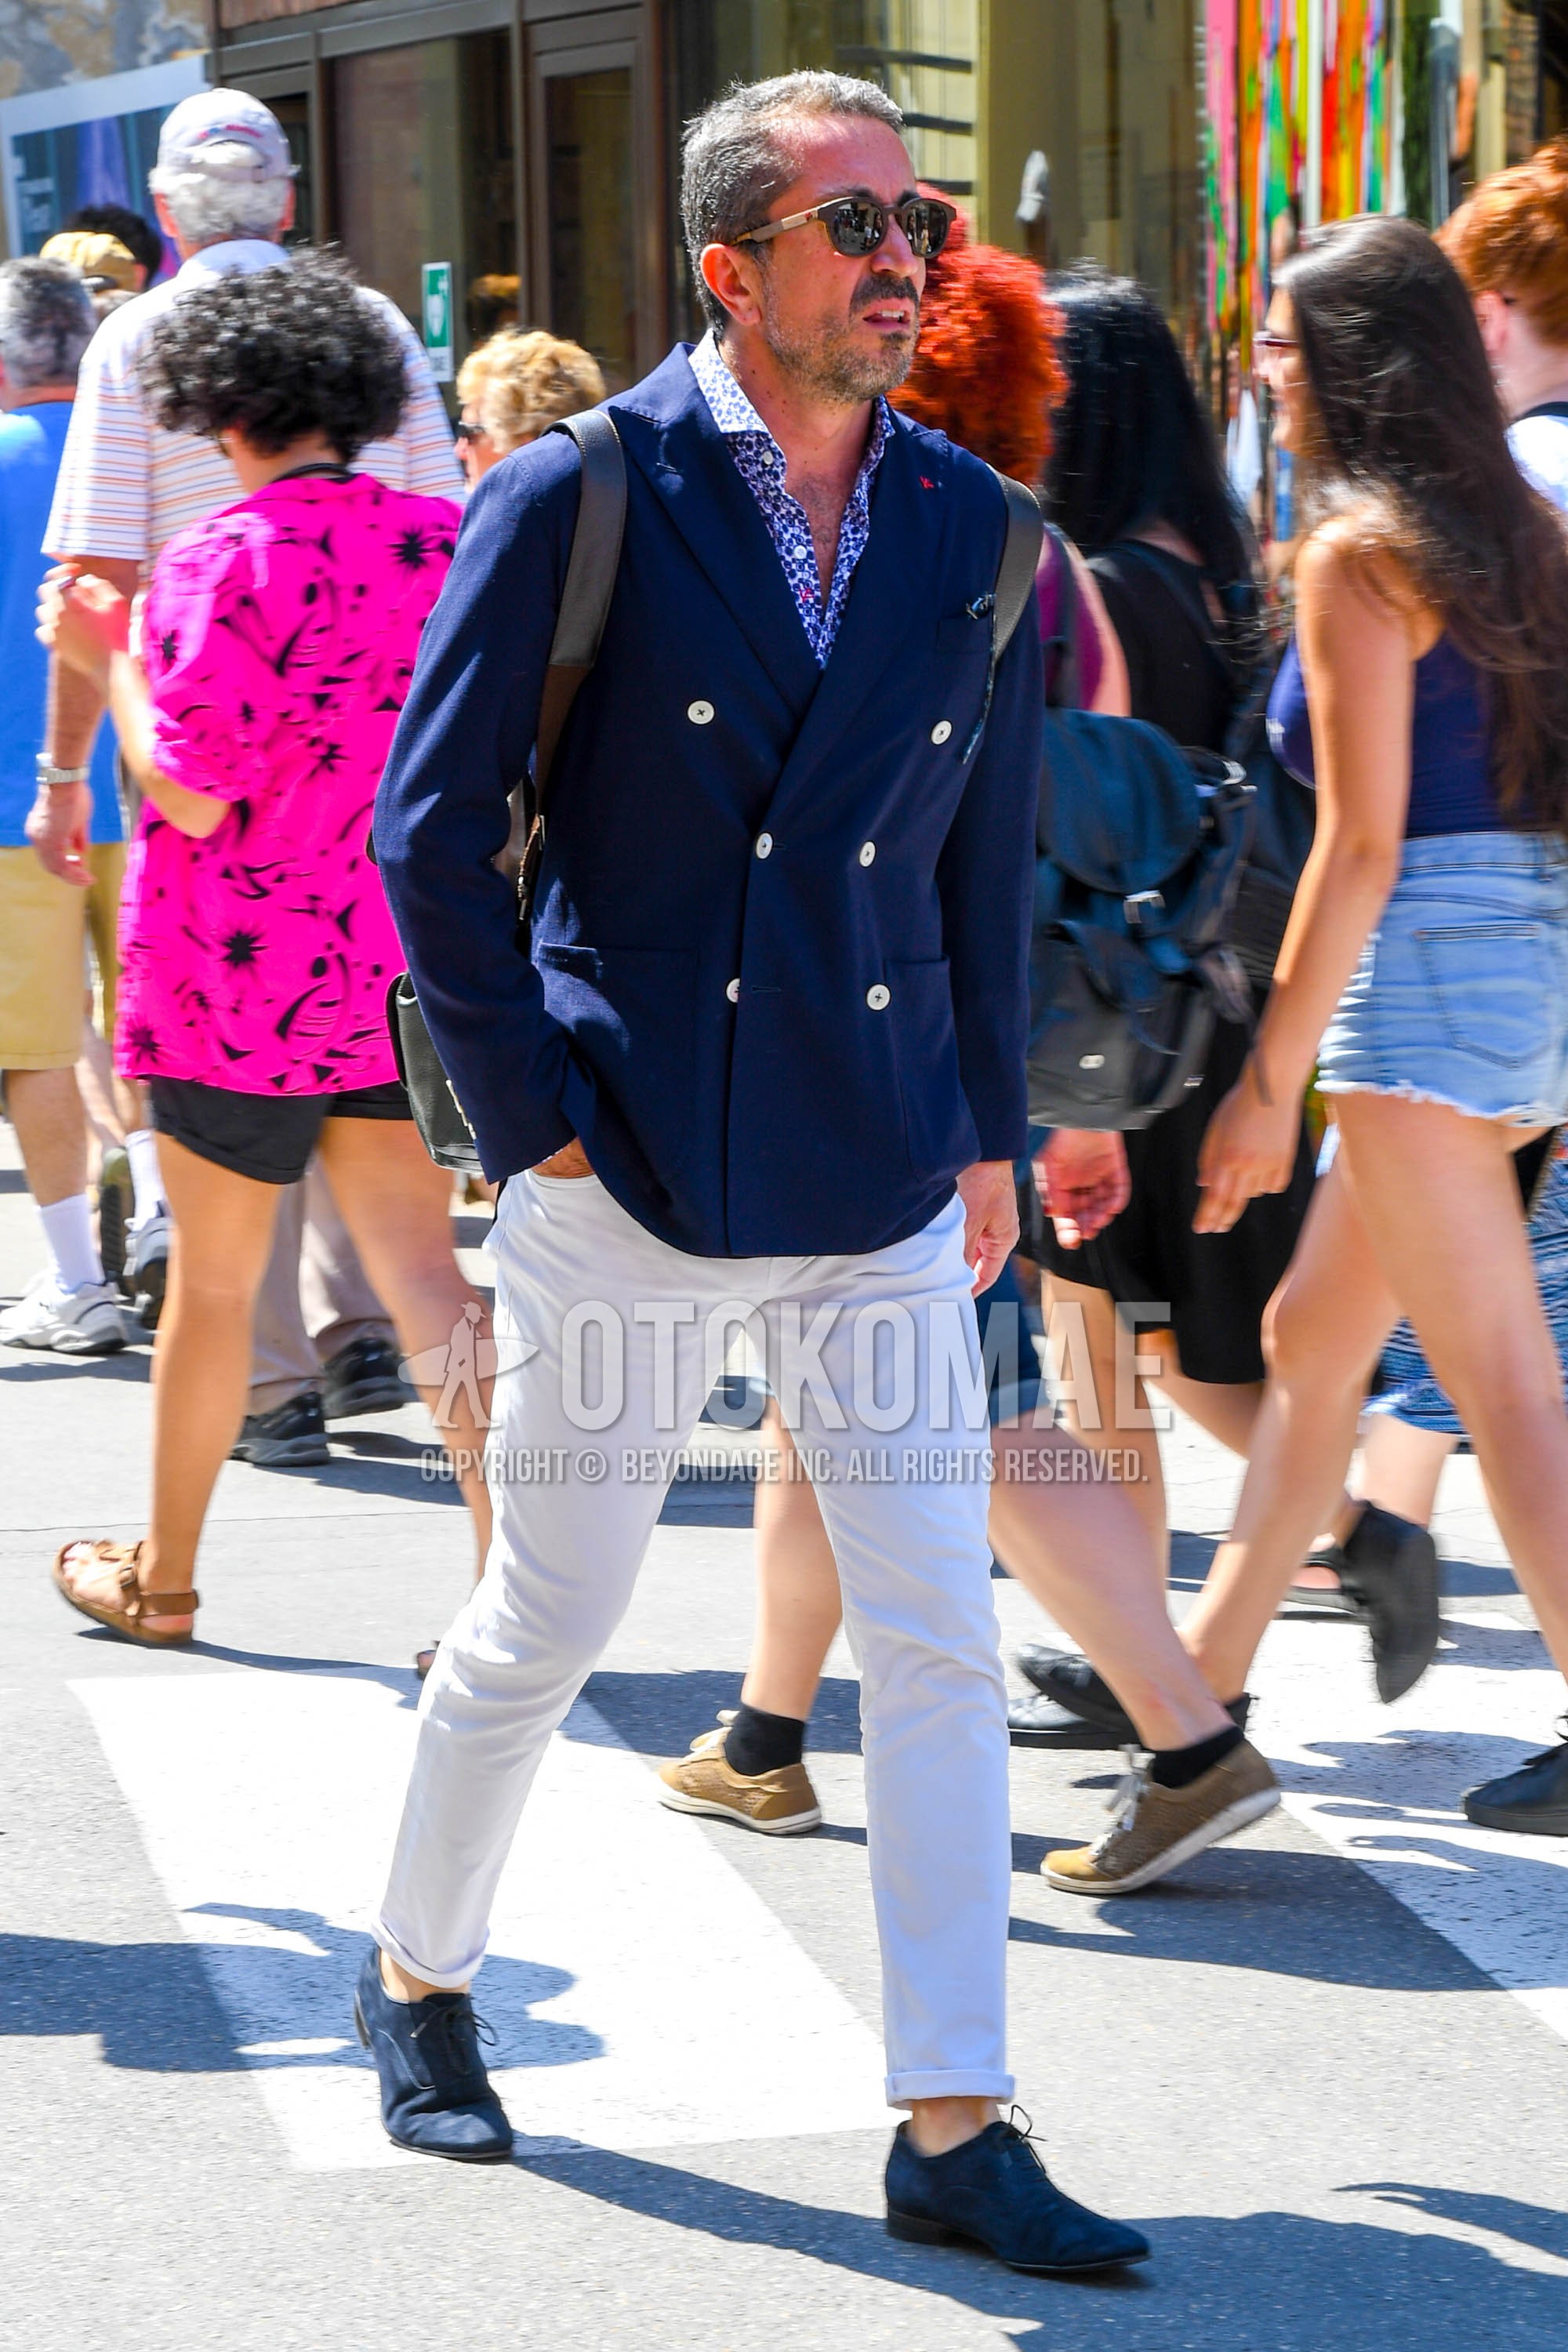 Men's spring summer autumn outfit with plain sunglasses, navy plain tailored jacket, blue tops/innerwear shirt, white plain damaged jeans, navy plain toe leather shoes.